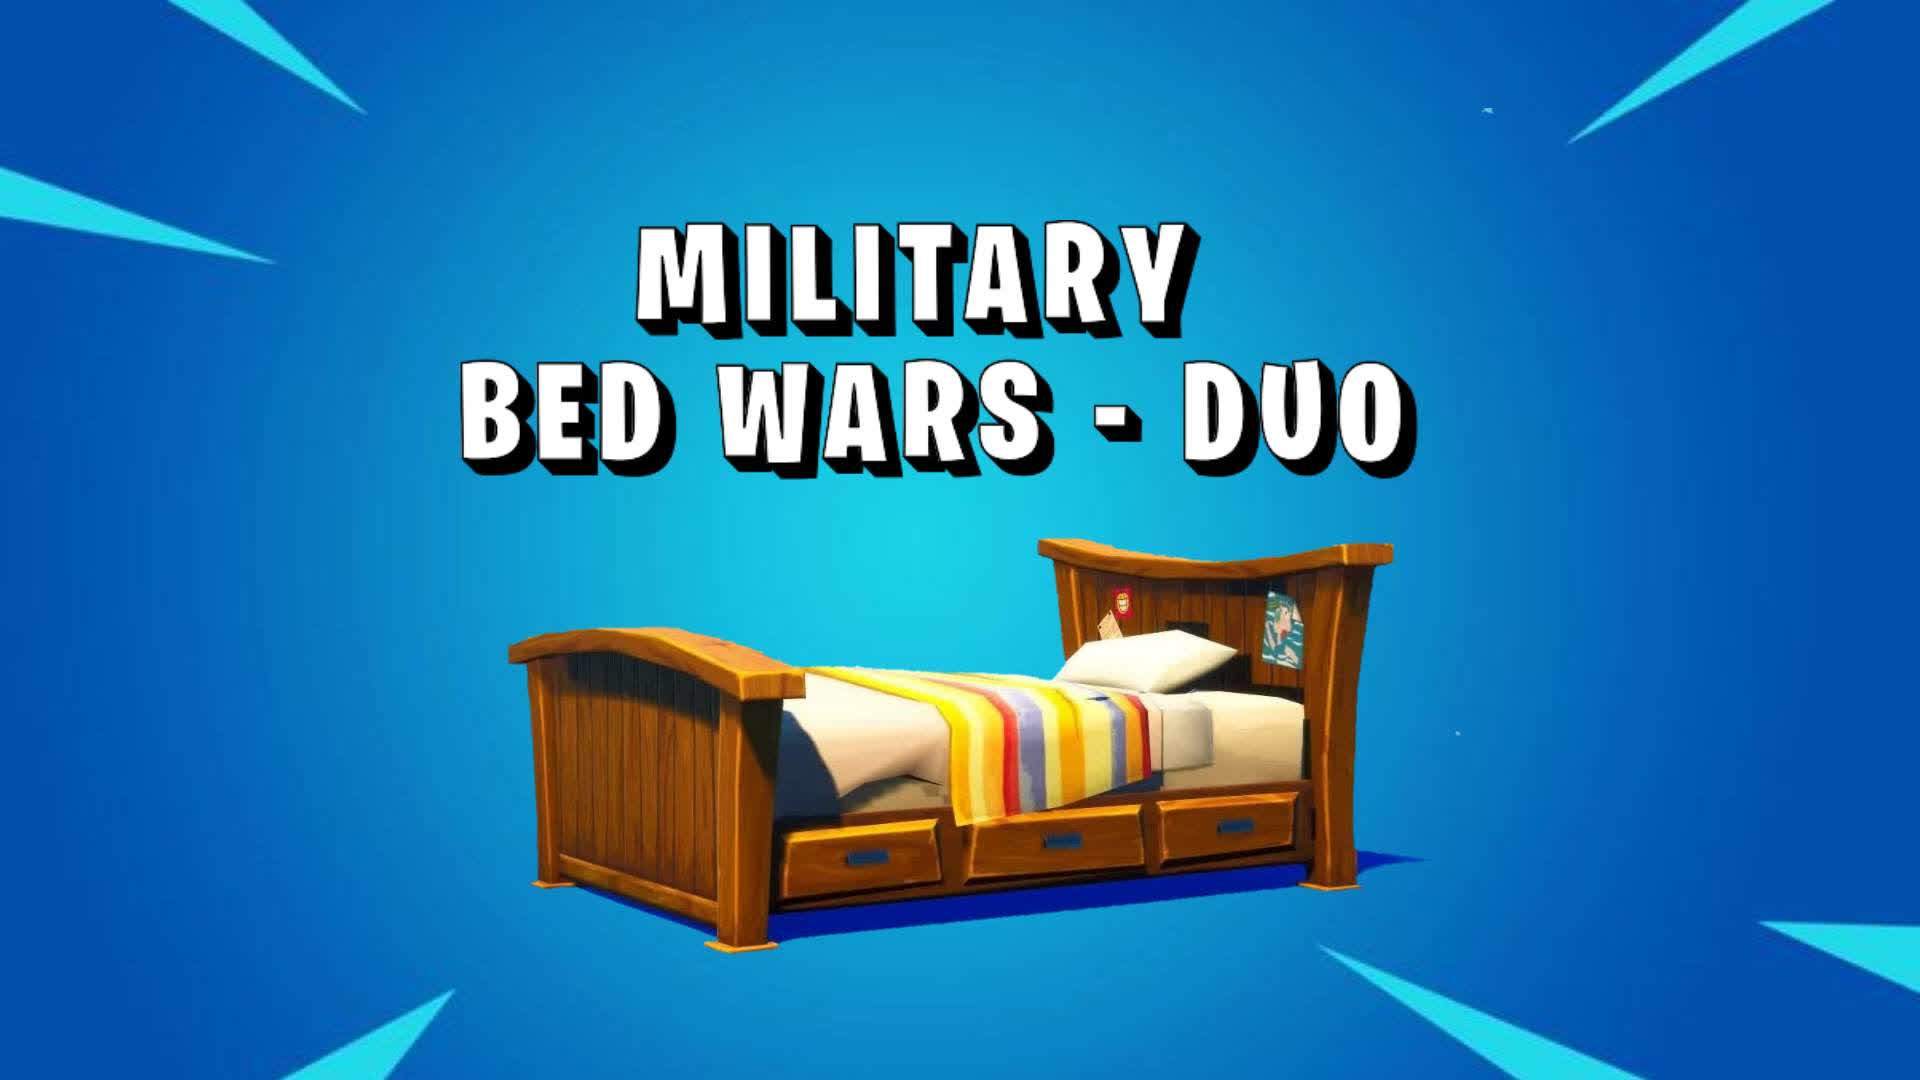 Military Bed Wars - DUO